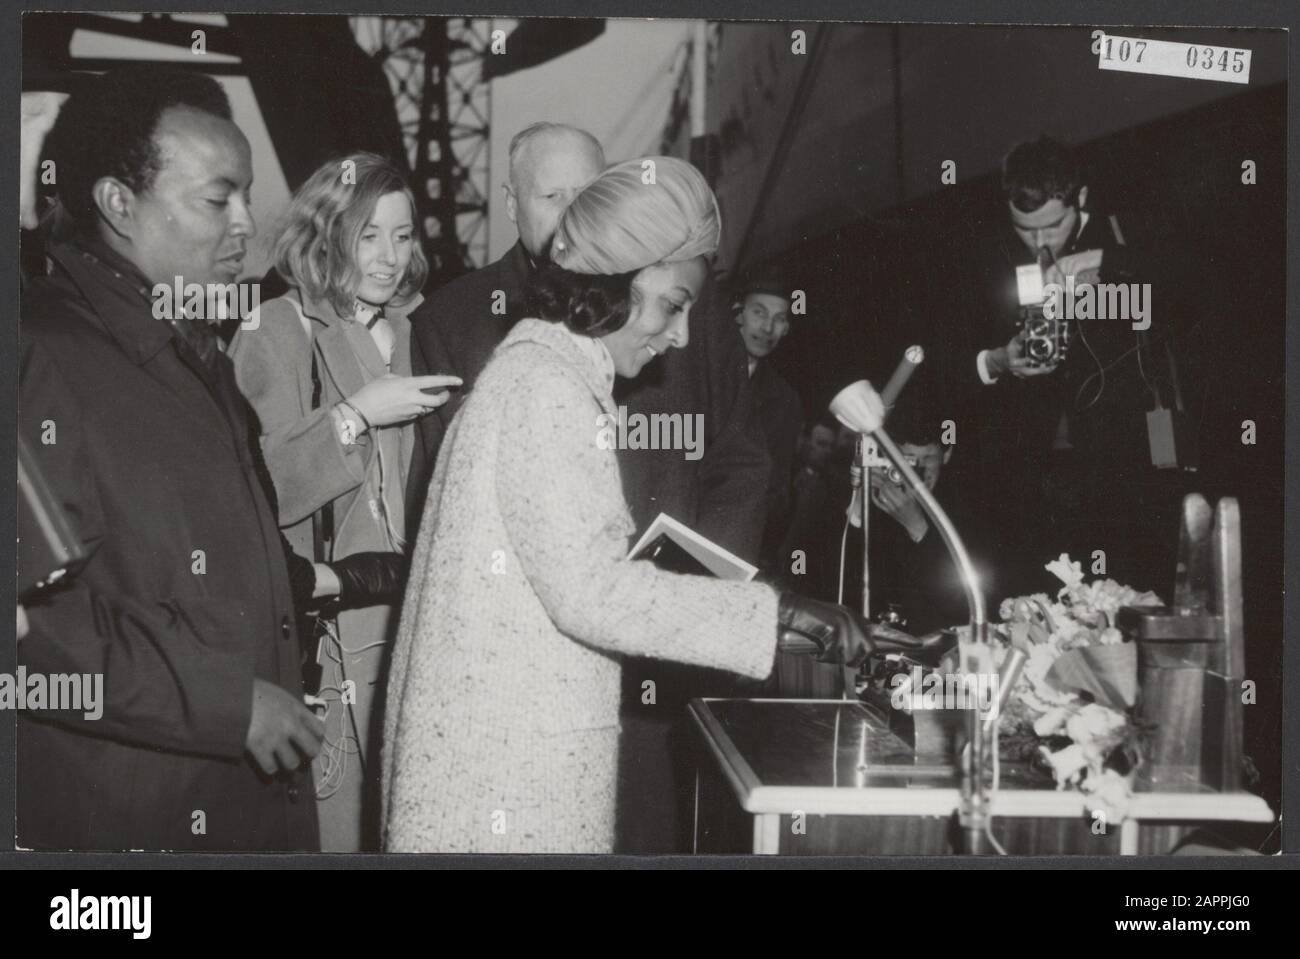 Princess Ruth Desta, the granddaughter of the emperor of Ehtiopia, performed at the yard of Verolme in Rozenburg the baptism of the 33,000 ton measuring motor tanker Lalibela. The tanker was built on behalf of Ethiopian Shipping Lines in Addis Ababa. With an axe the princess chops the line through which the champagne fels hit the ship wall. Completely left Alexander Desta, grandson of the Emperor Date: 1 April 1966 Location: Ethiopia, Rozenburg Keywords: baptisms, shipbuilding, shipyards, ships, tankers Personal name: Desta Alexander, Desta Ruth, Ethiopian Shipping Lines Institution name: Lali Stock Photo